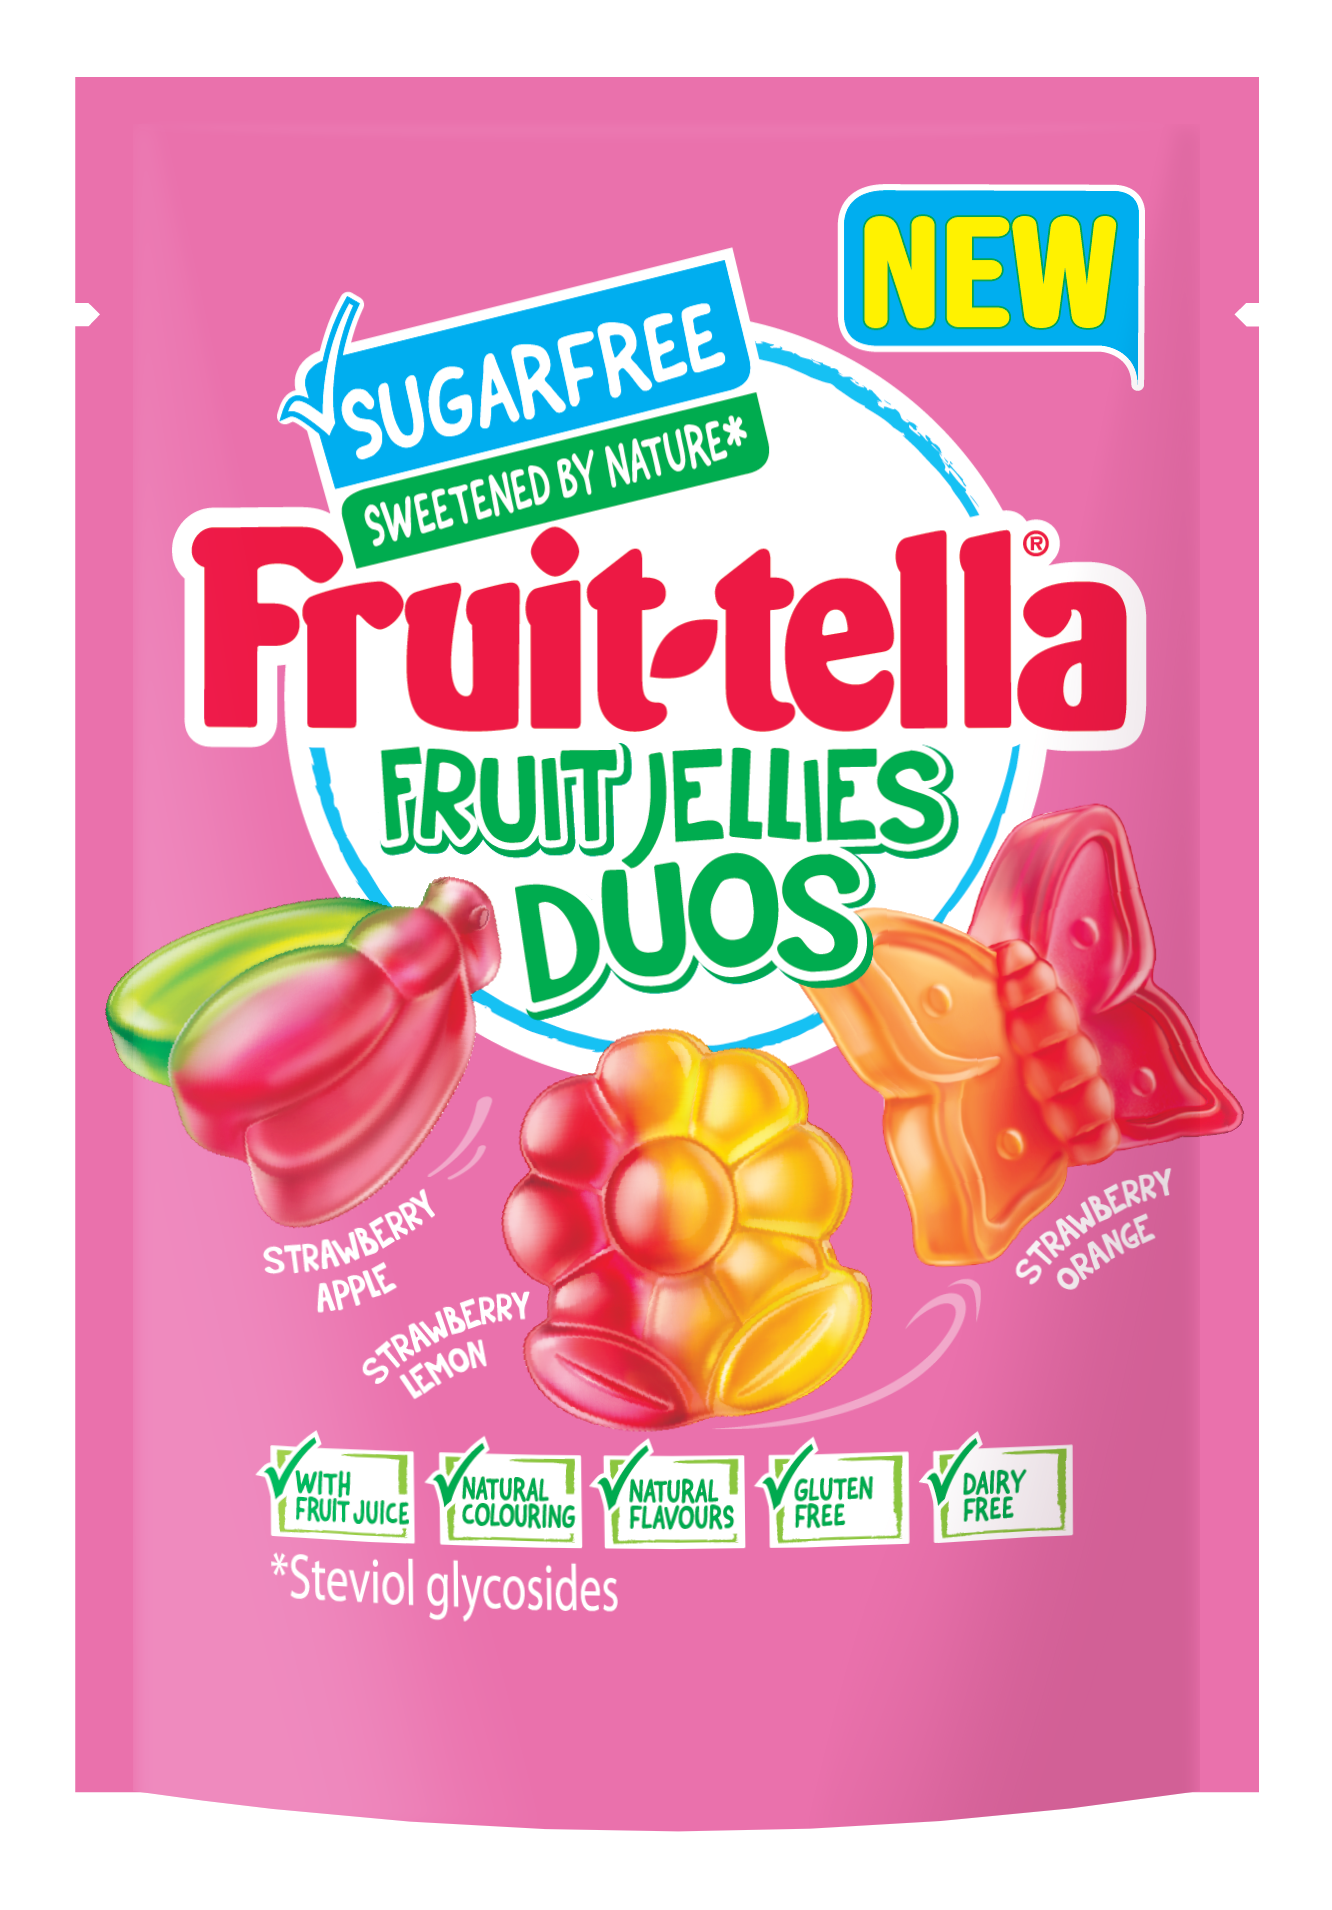 Fan favourite Fruittella launches new free-from soft jellies